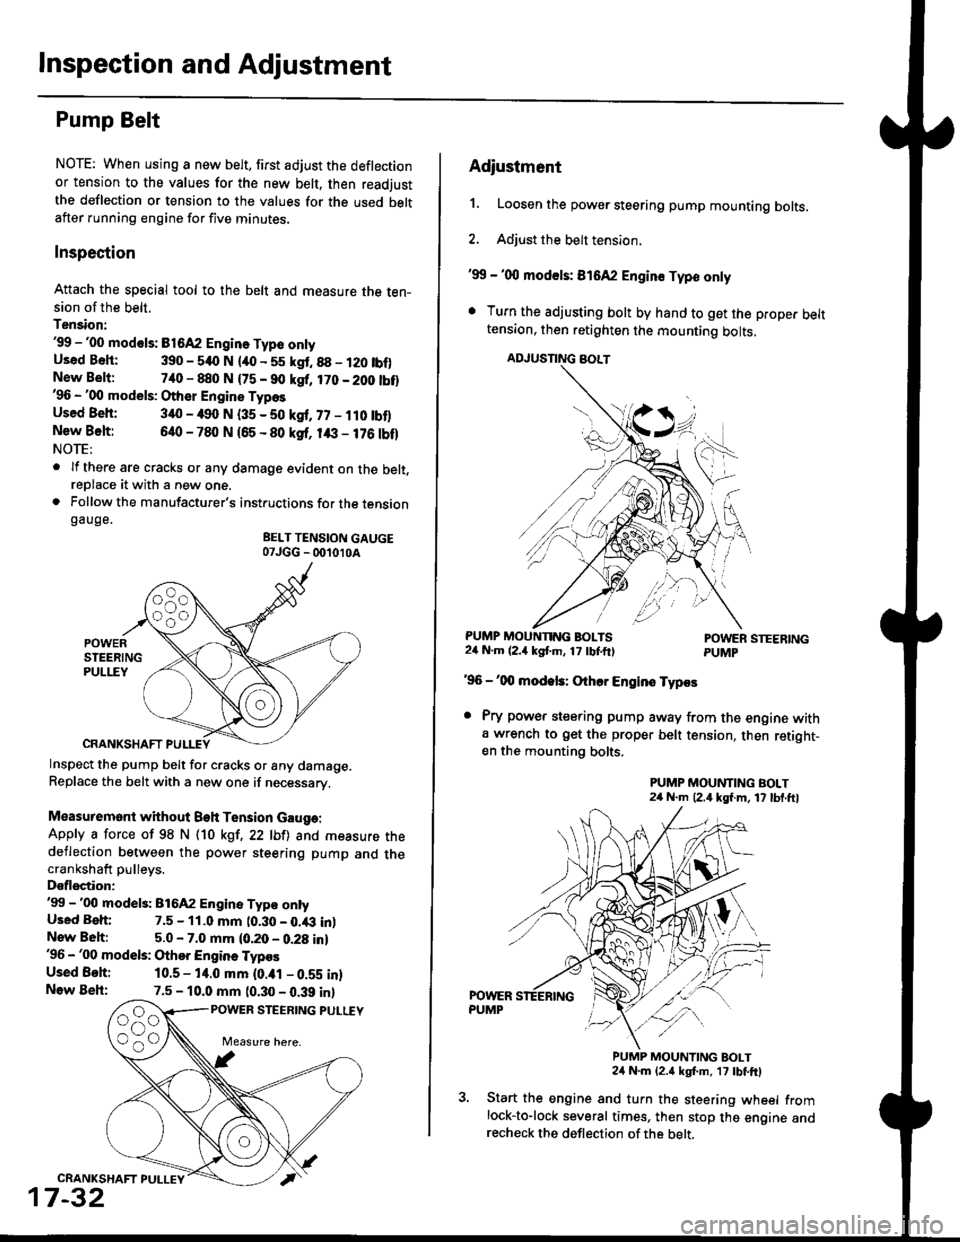 HONDA CIVIC 1996 6.G Owners Manual Inspection and Adjustment
Pump Belt
NOTE: When using a new belt, first adjust the deflection
or tension to the values for the new belt, then readjust
the deflection or tension to the values for the us